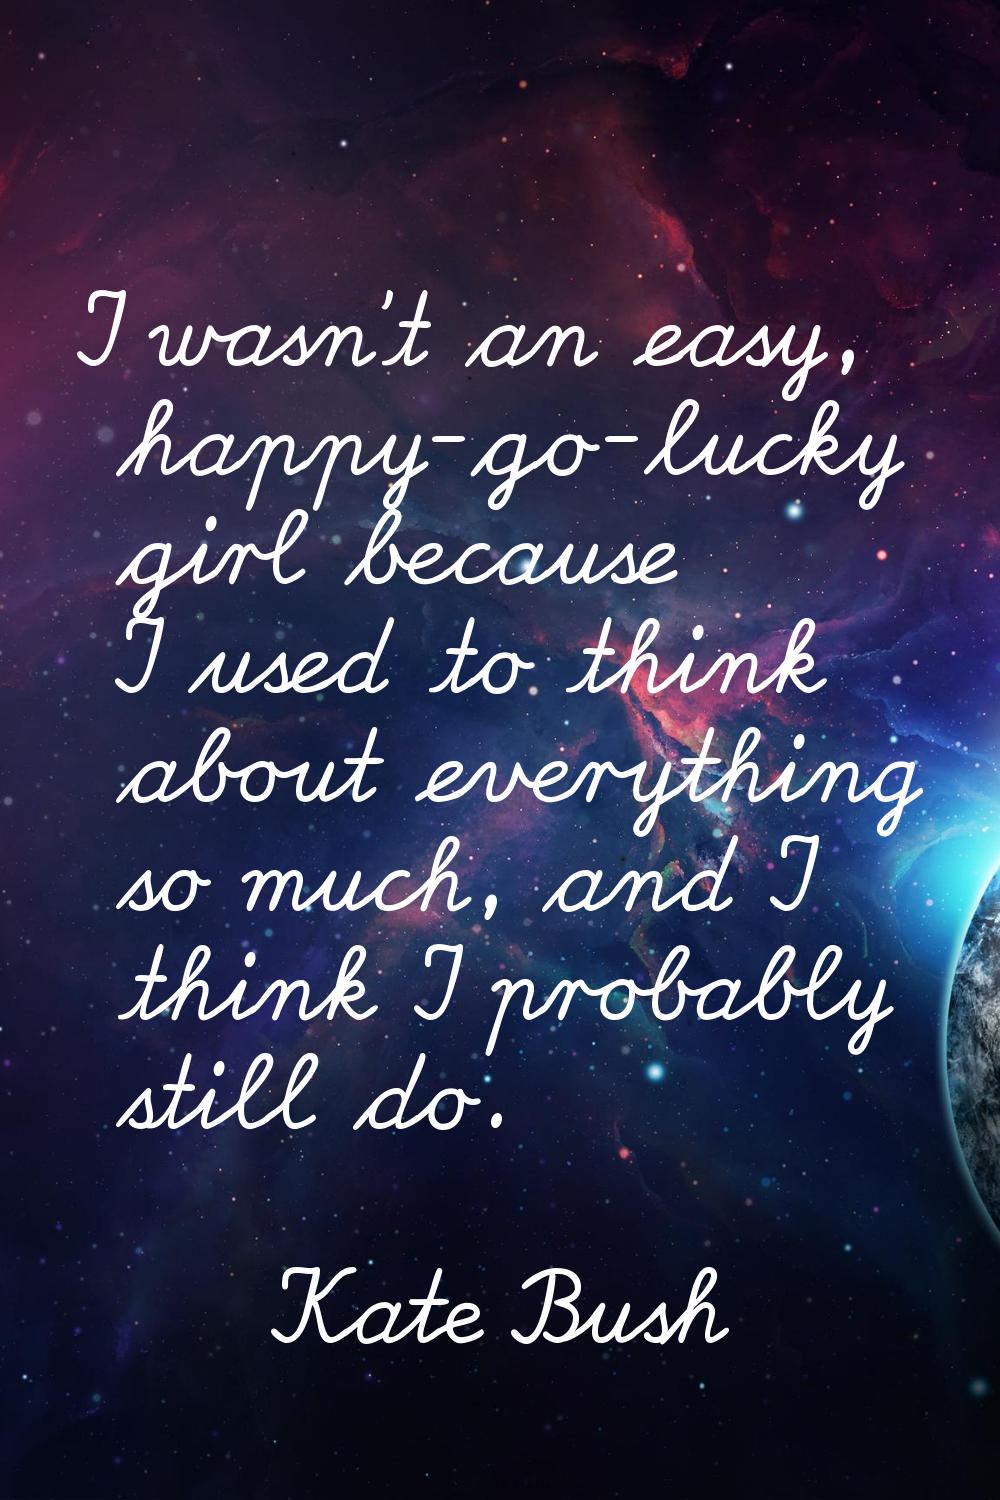 I wasn't an easy, happy-go-lucky girl because I used to think about everything so much, and I think